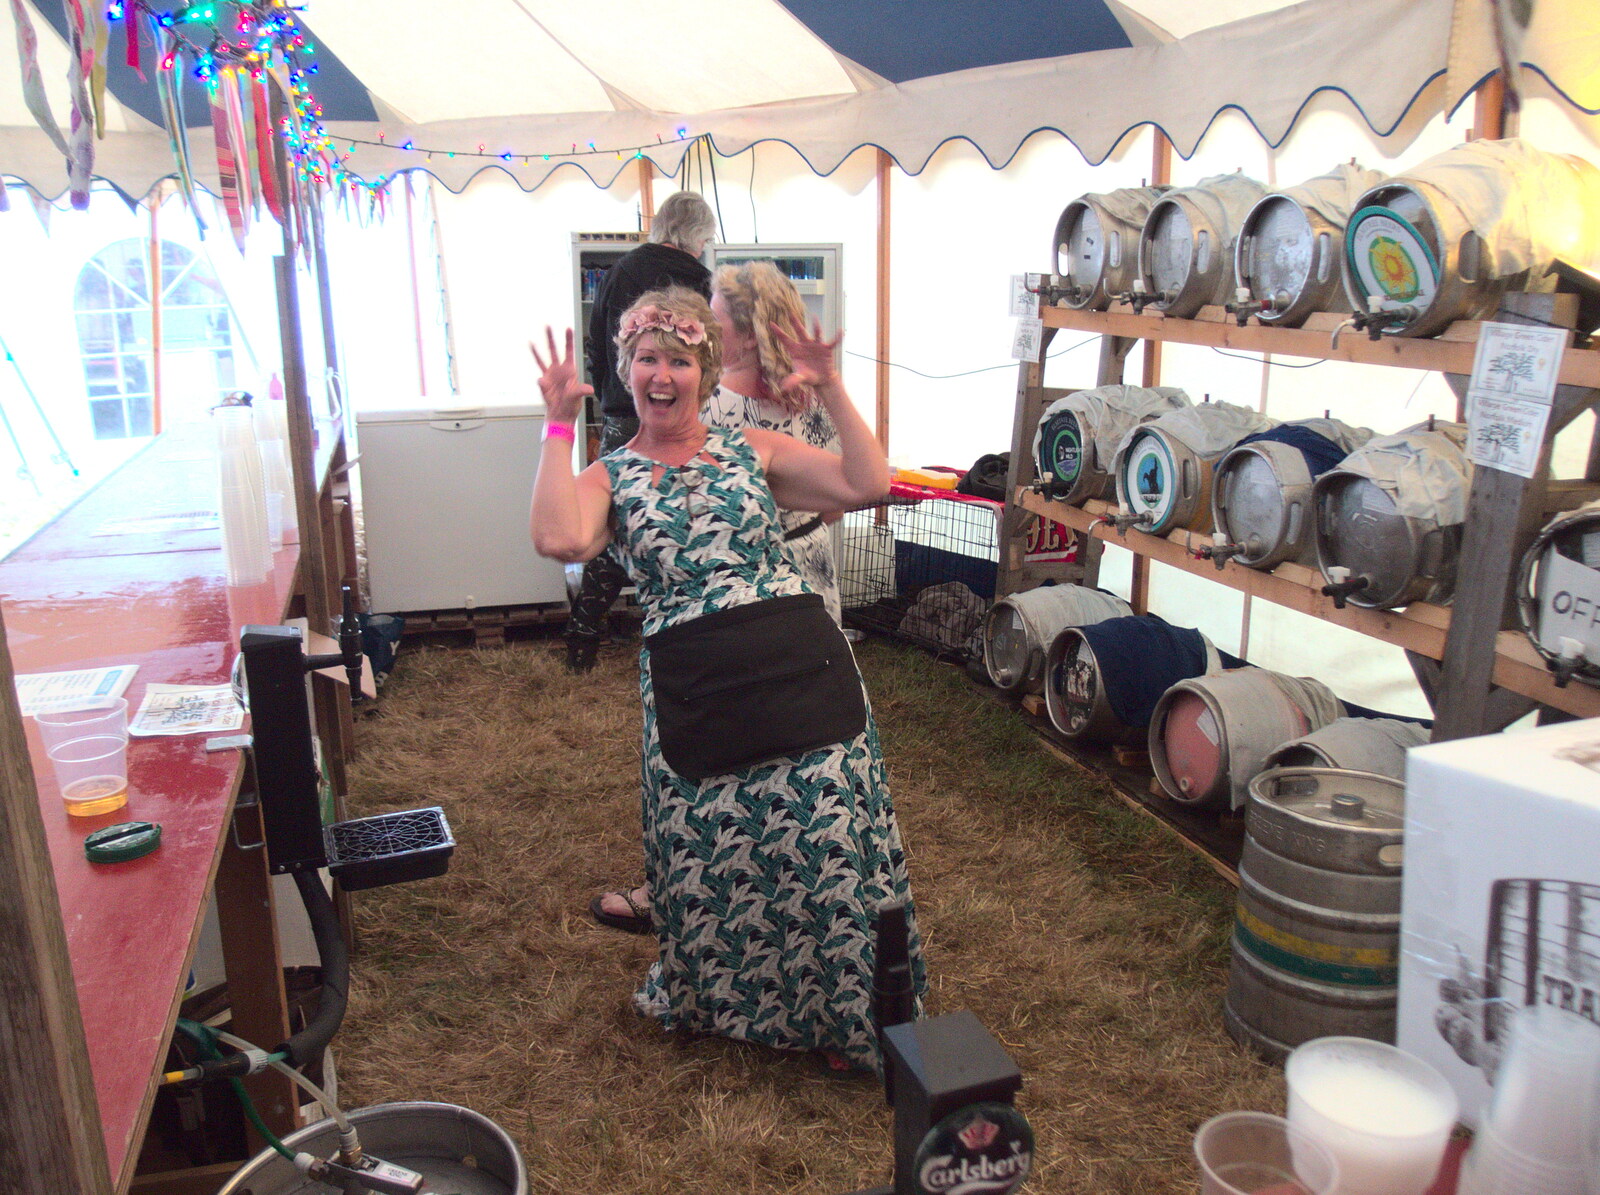 The bar staff get carried away from WoW Festival, Burston, Norfolk - 29th June - 1st July 2018